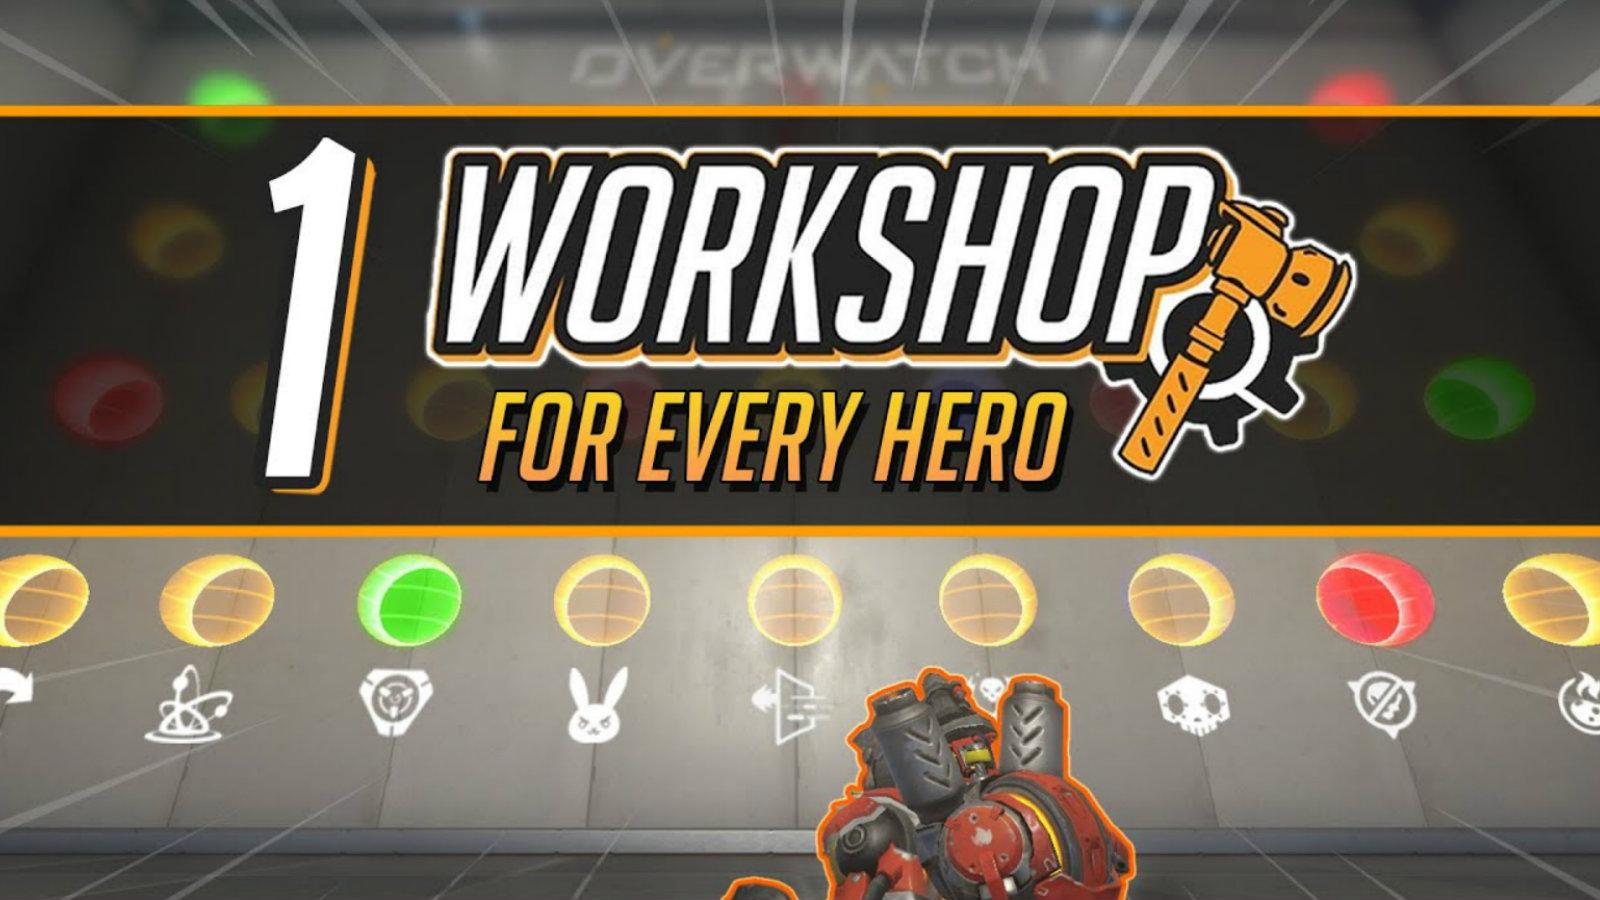 Overwatch Workshop tips for every hero